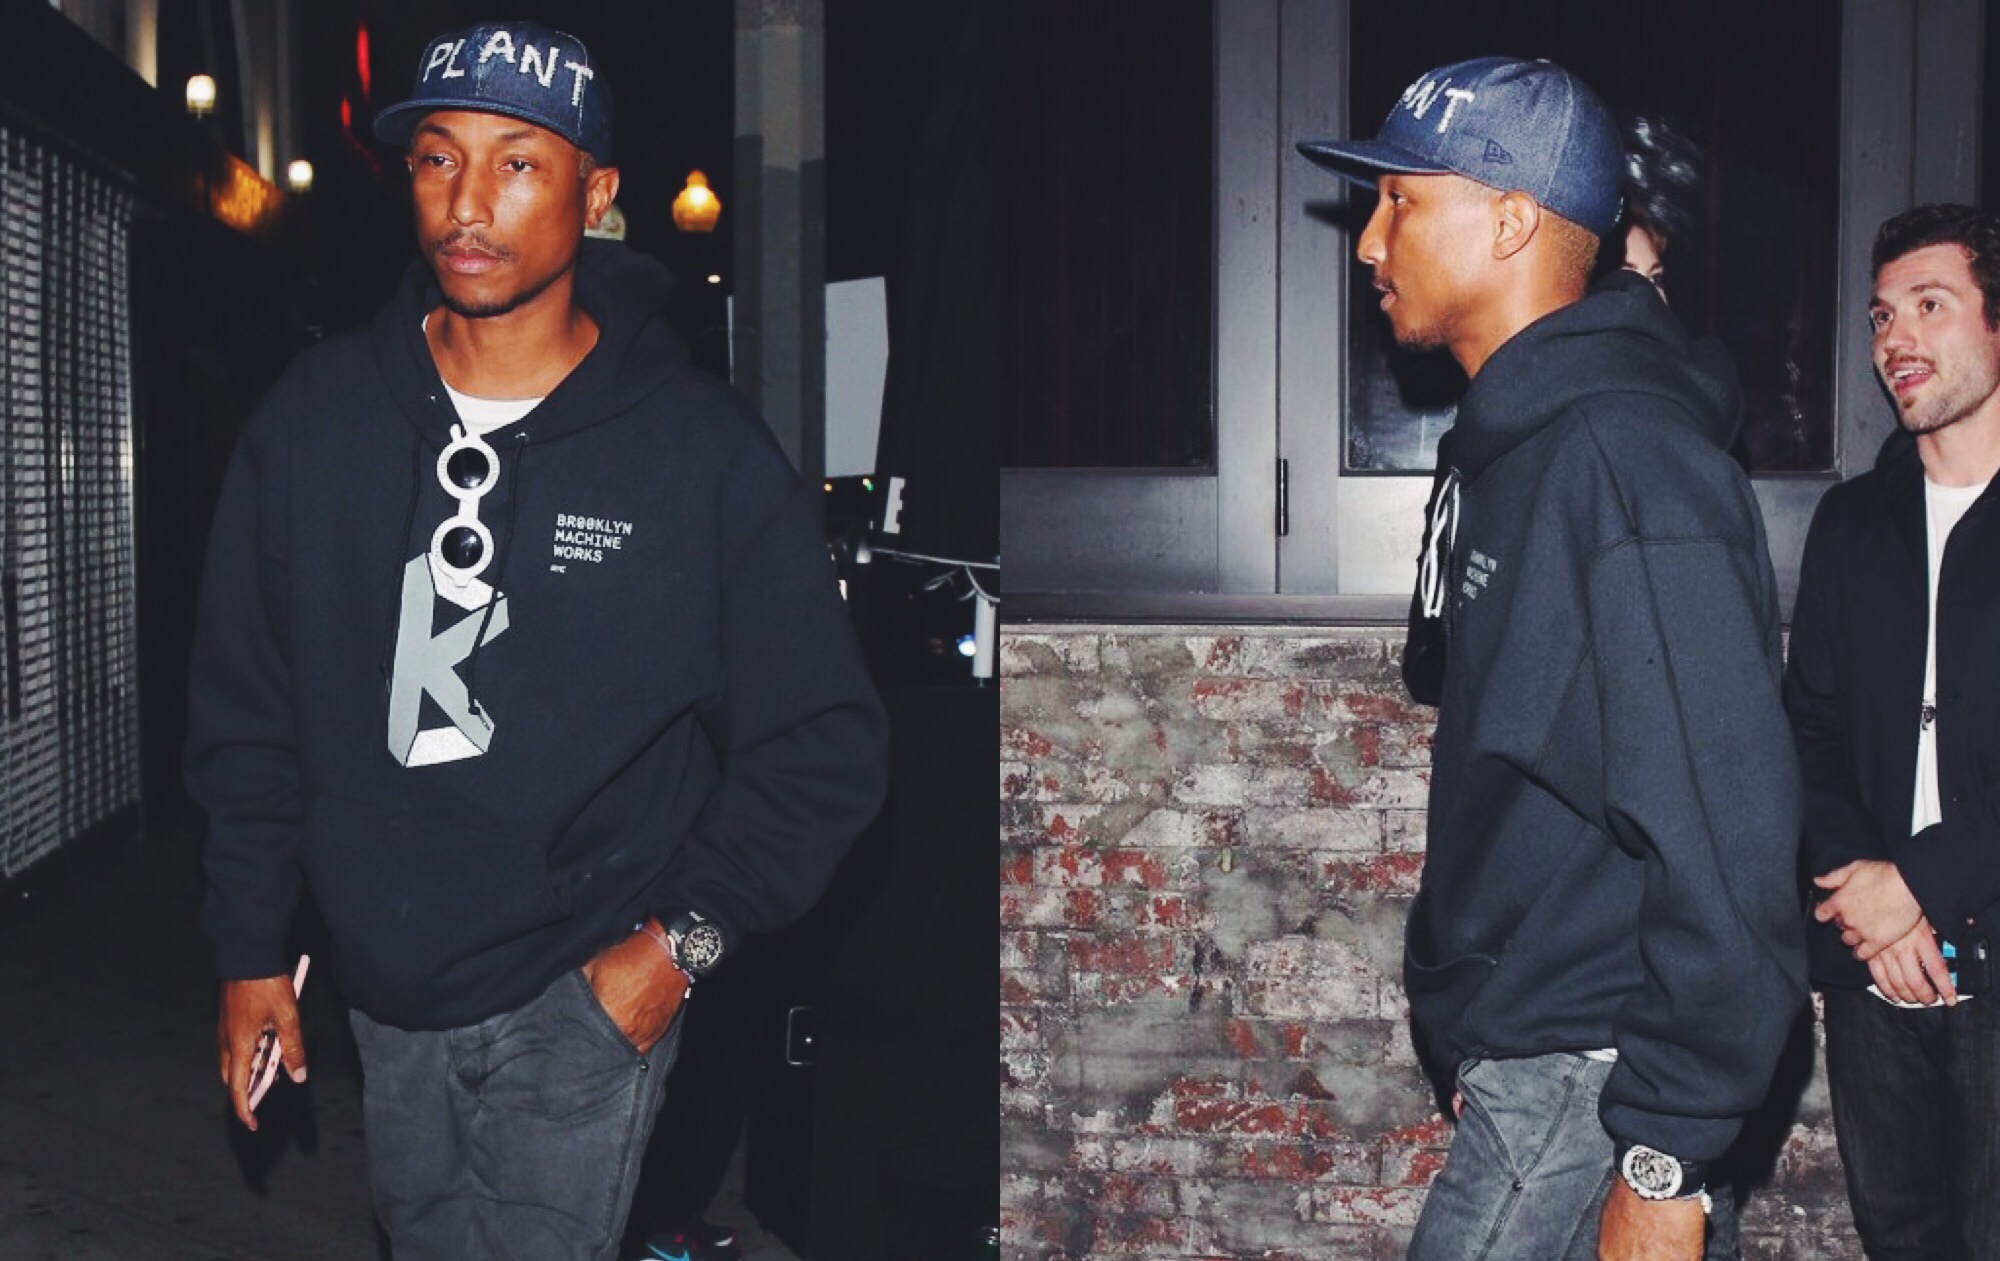 Spotted: Pharrell at Lady Gaga’s Birthday In Machine Works + Timberland Boots